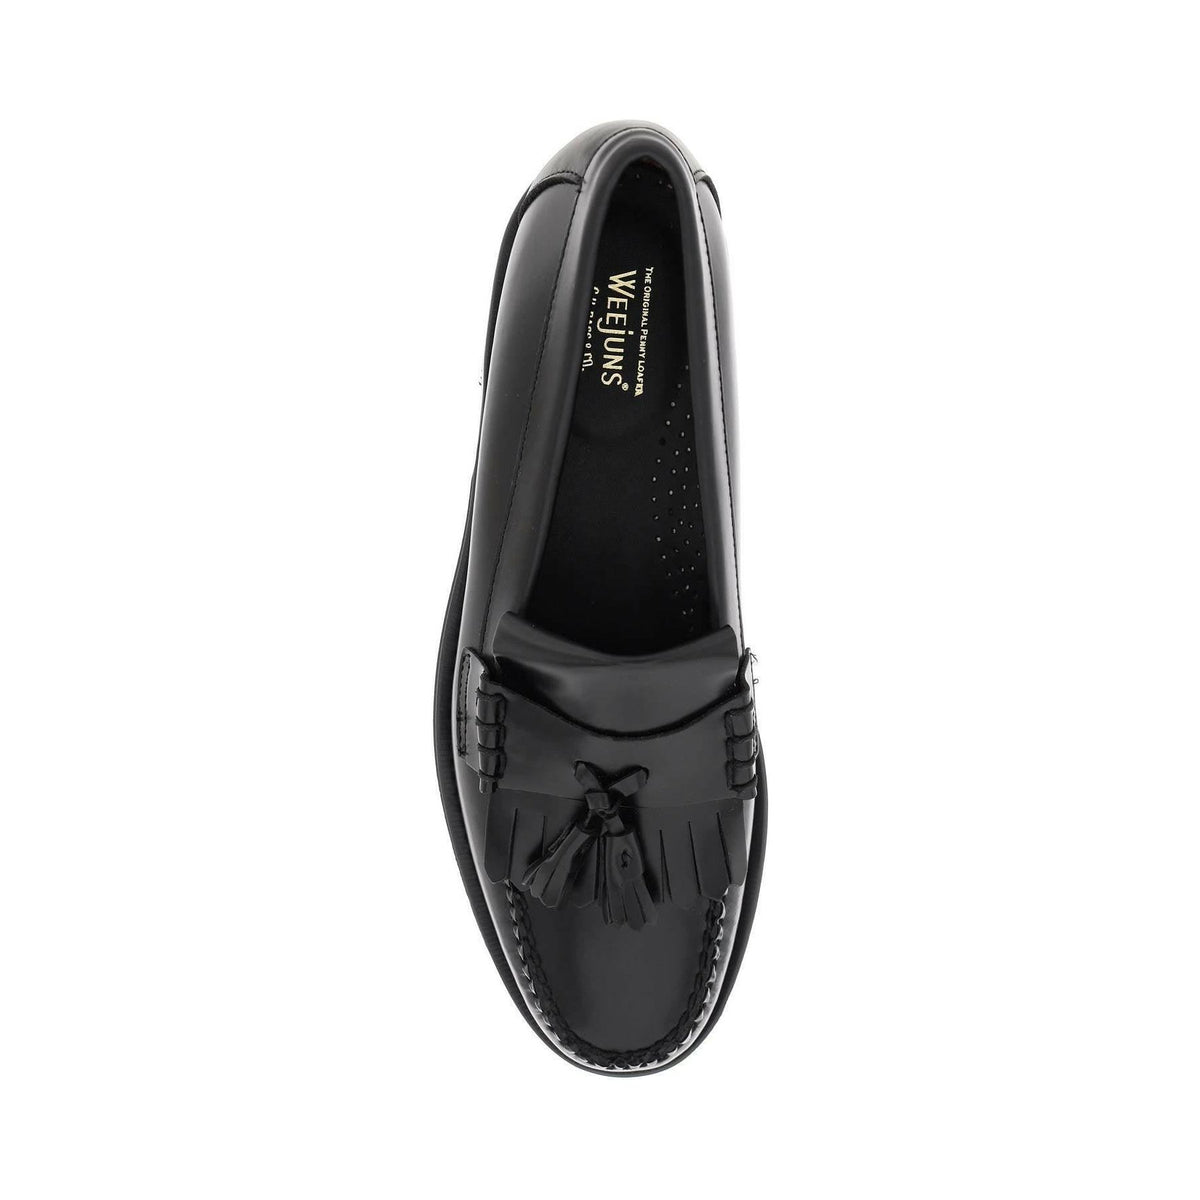 Black Leather Esther Kiltie Weejuns Loafers With Tassels G.H. BASS JOHN JULIA.